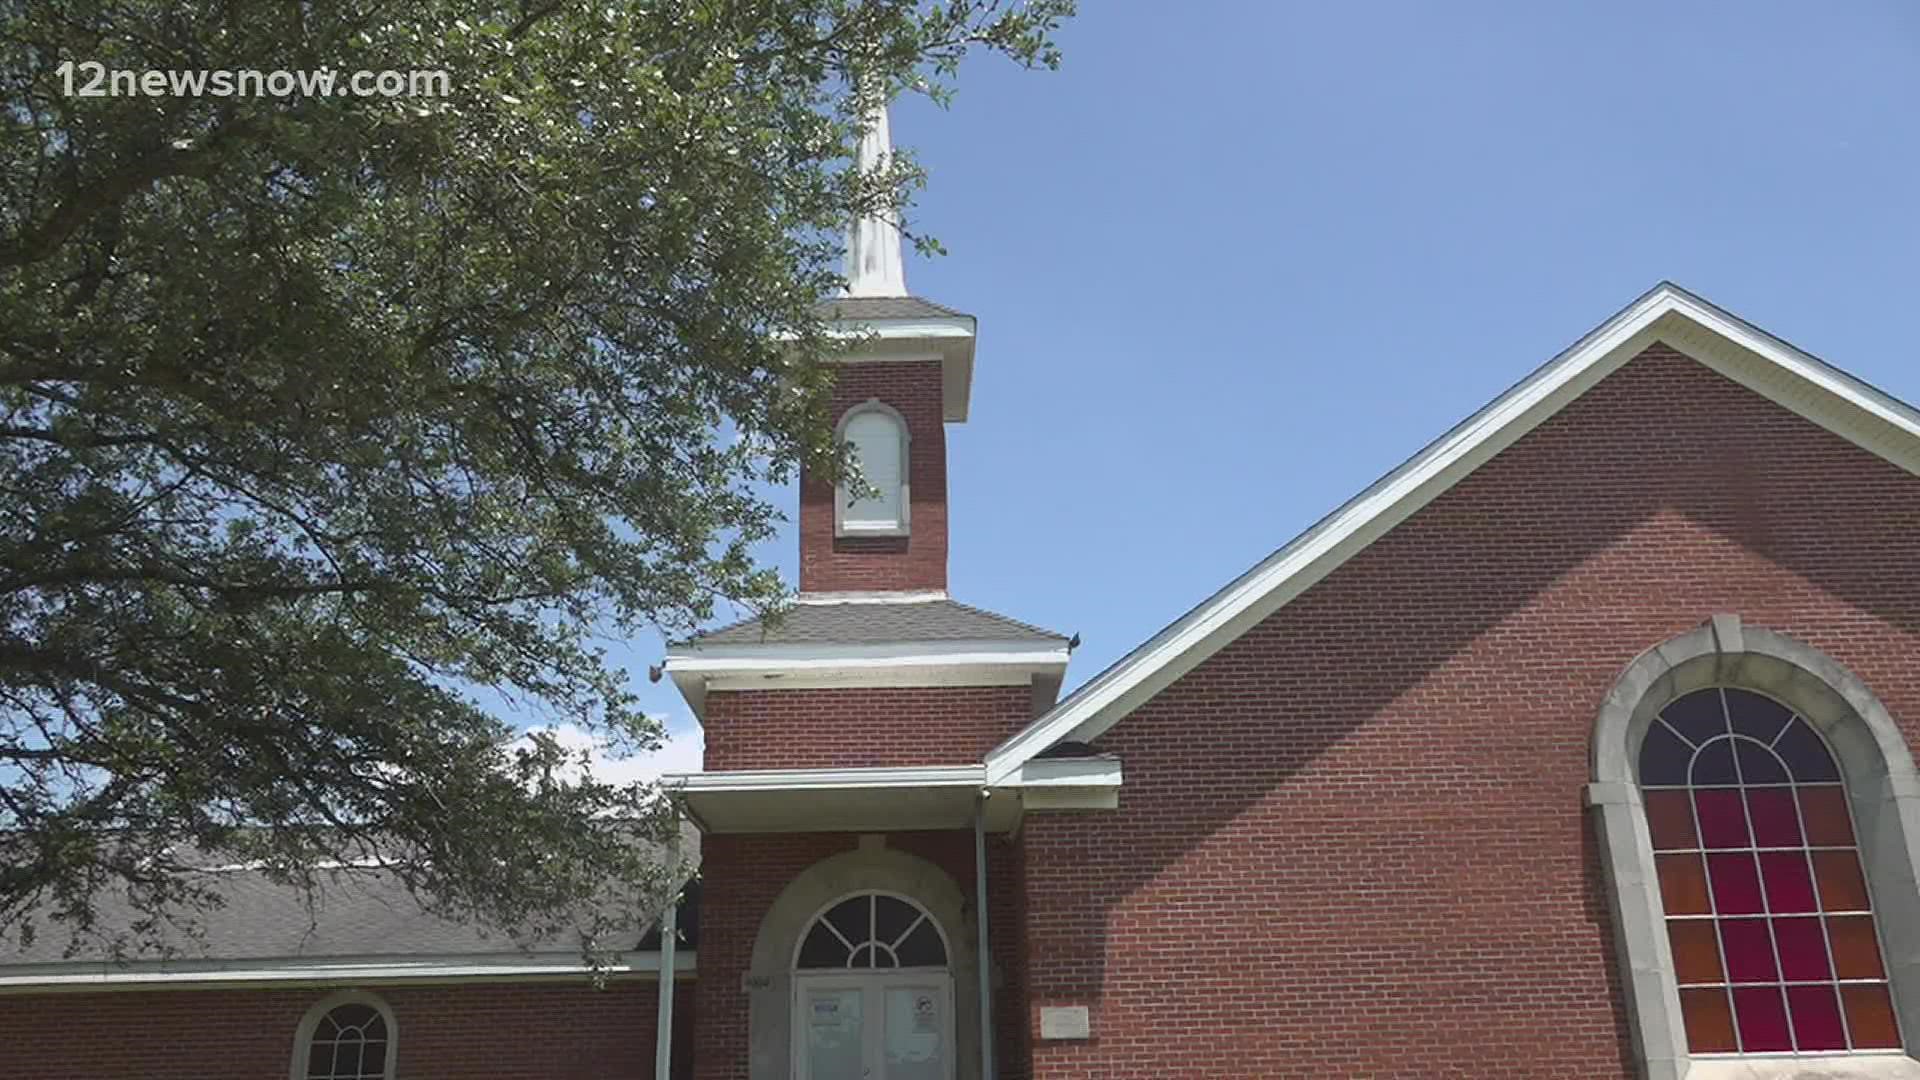 Police believe it's a group of people working together during church services.